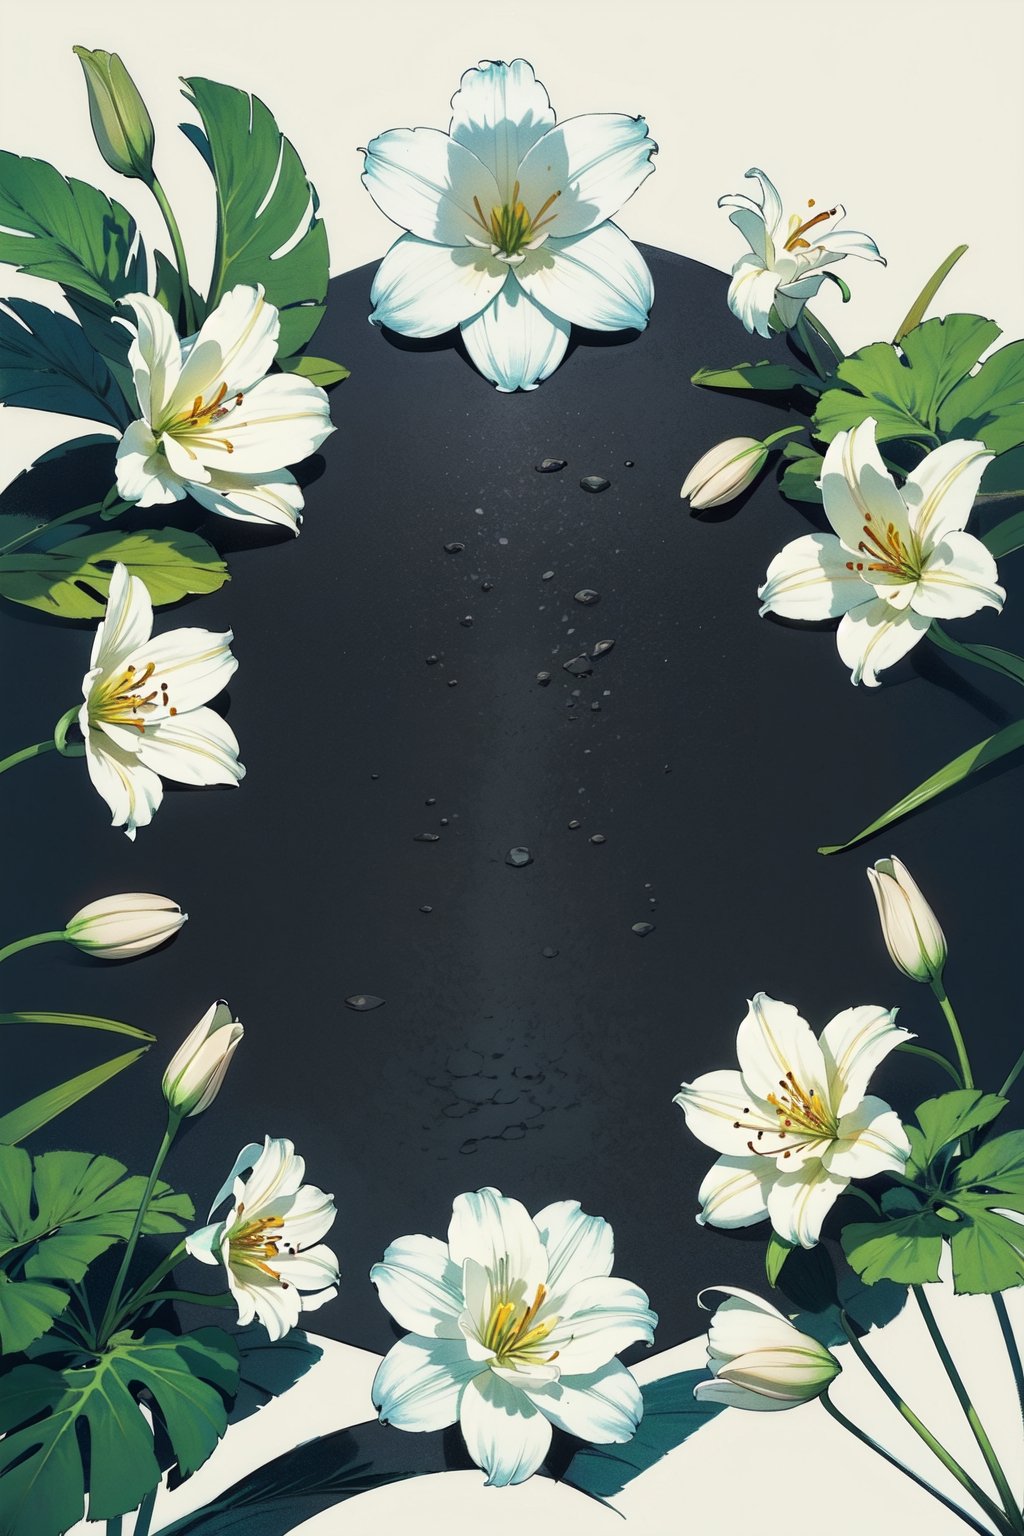 (masterpiece, top quality), background with white lilies, no person
,EpicArt